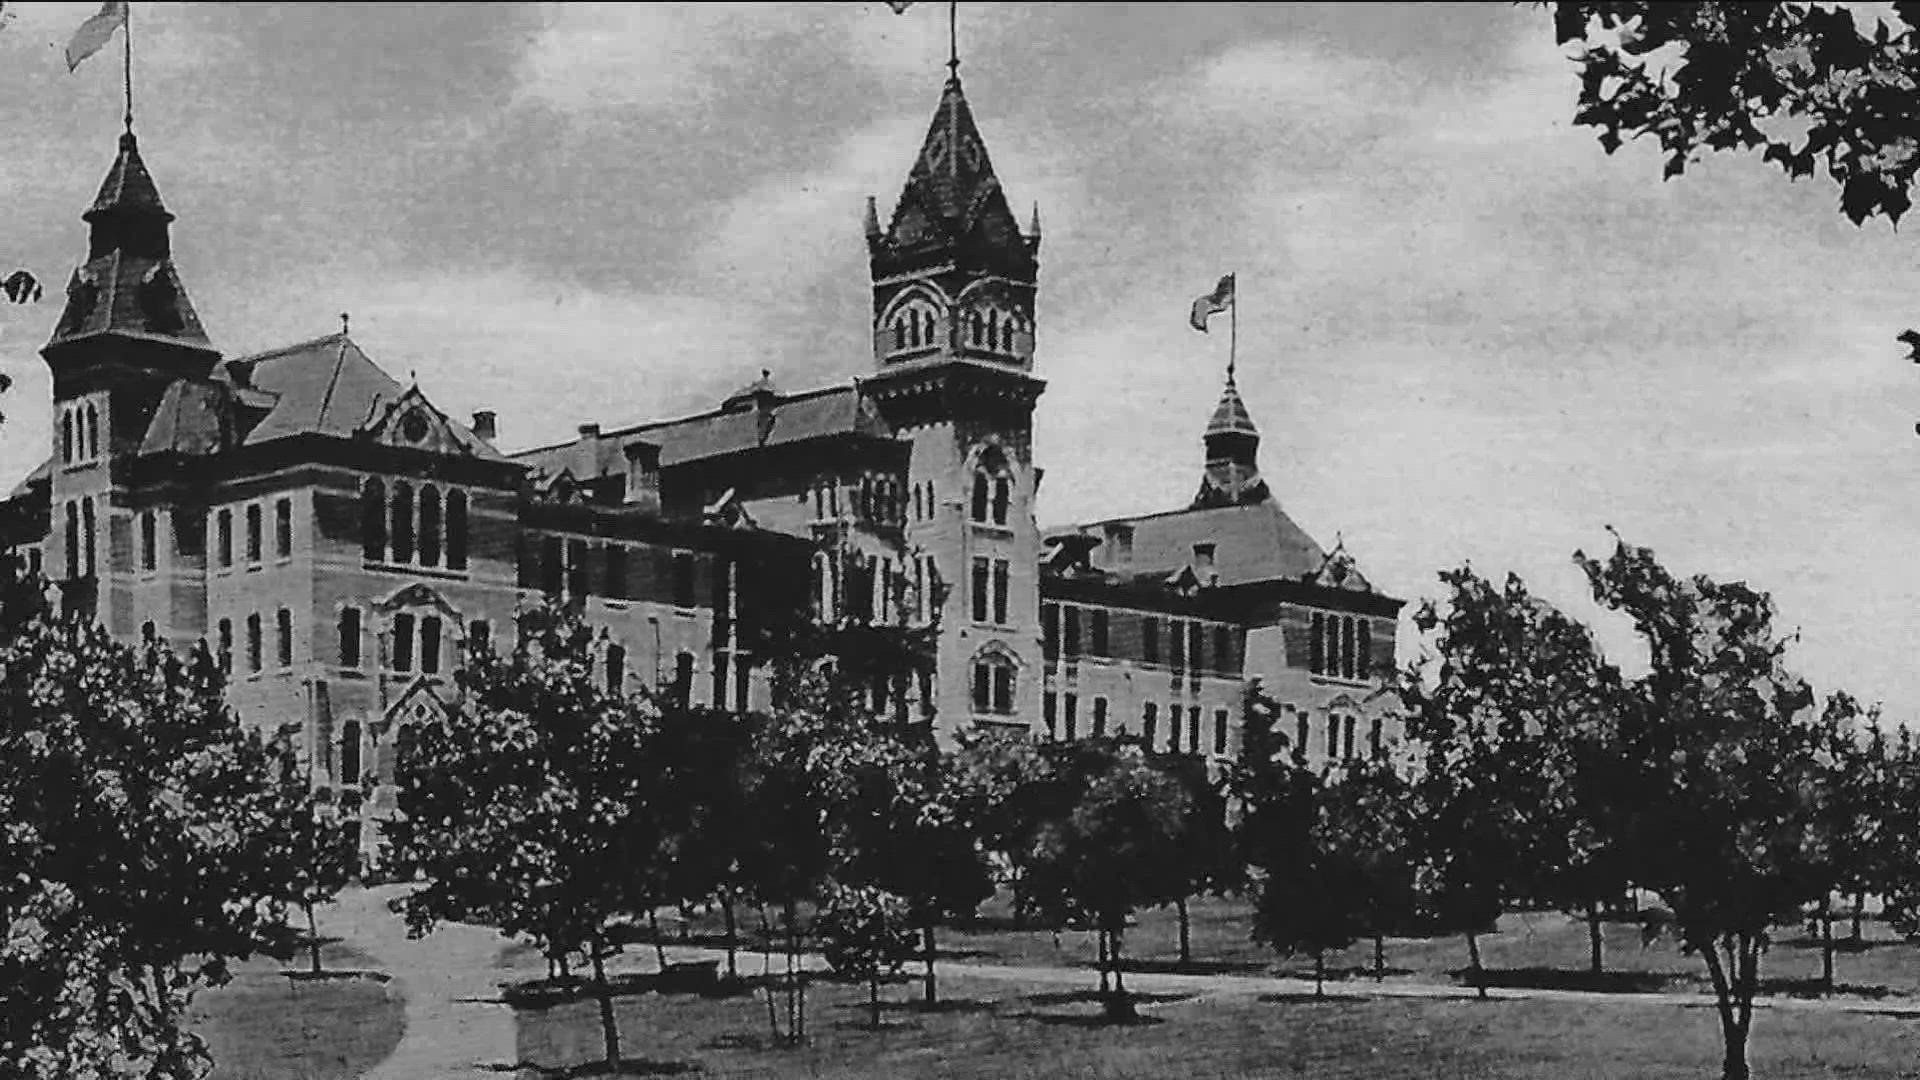 Back in the early 1900s, the University of Texas at Austin's Old Main building seemed to be home to a piano-playing ghost. KVUE's Bob Buckalew tells us the story.